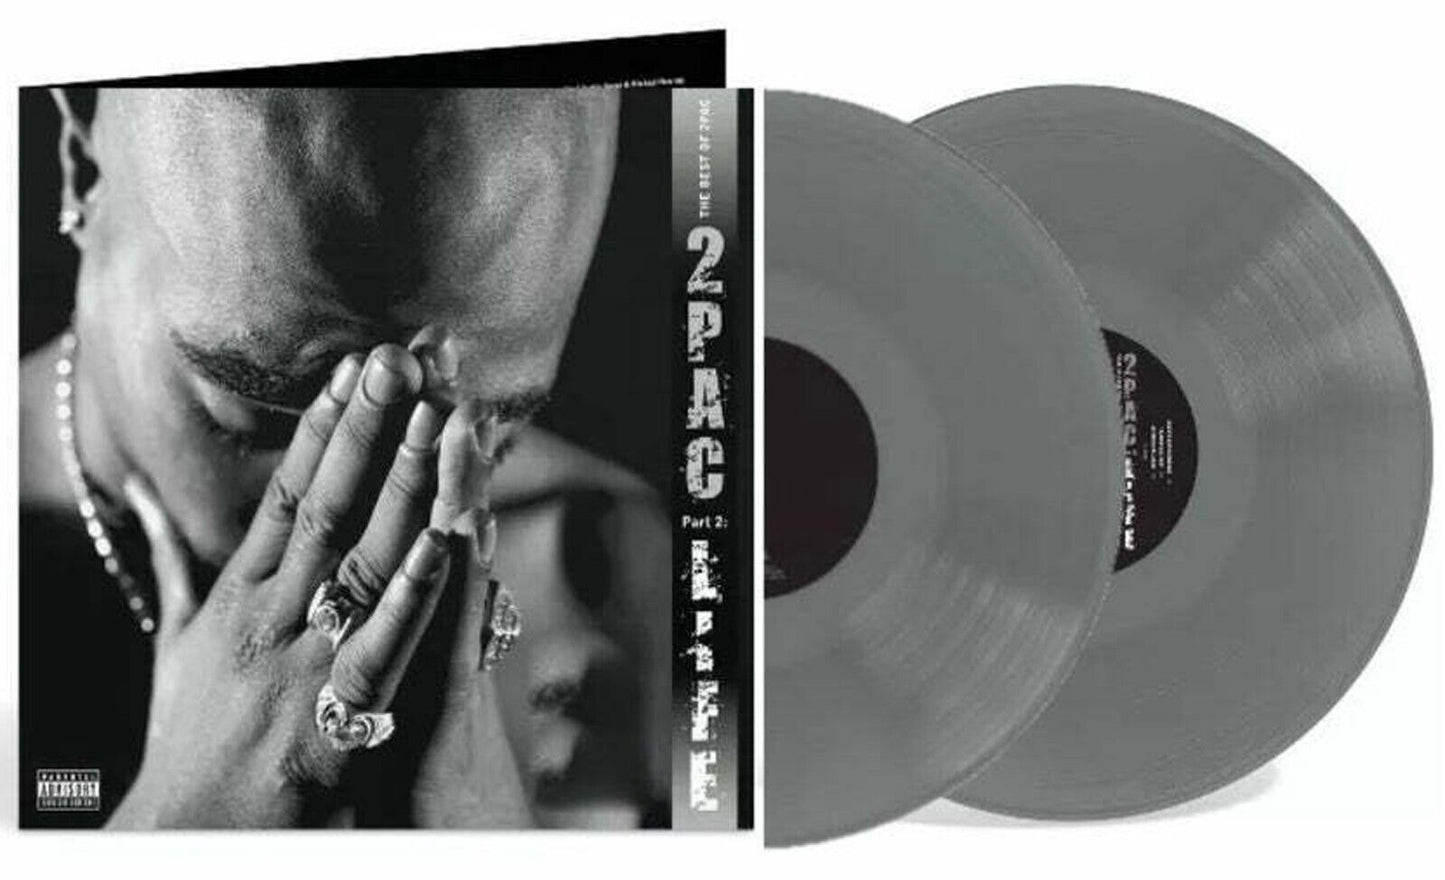 2Pac - The Best Of 2Pac - Part 2: Life (Limited Edition, Grey Vinyl) (2 LP) - Joco Records